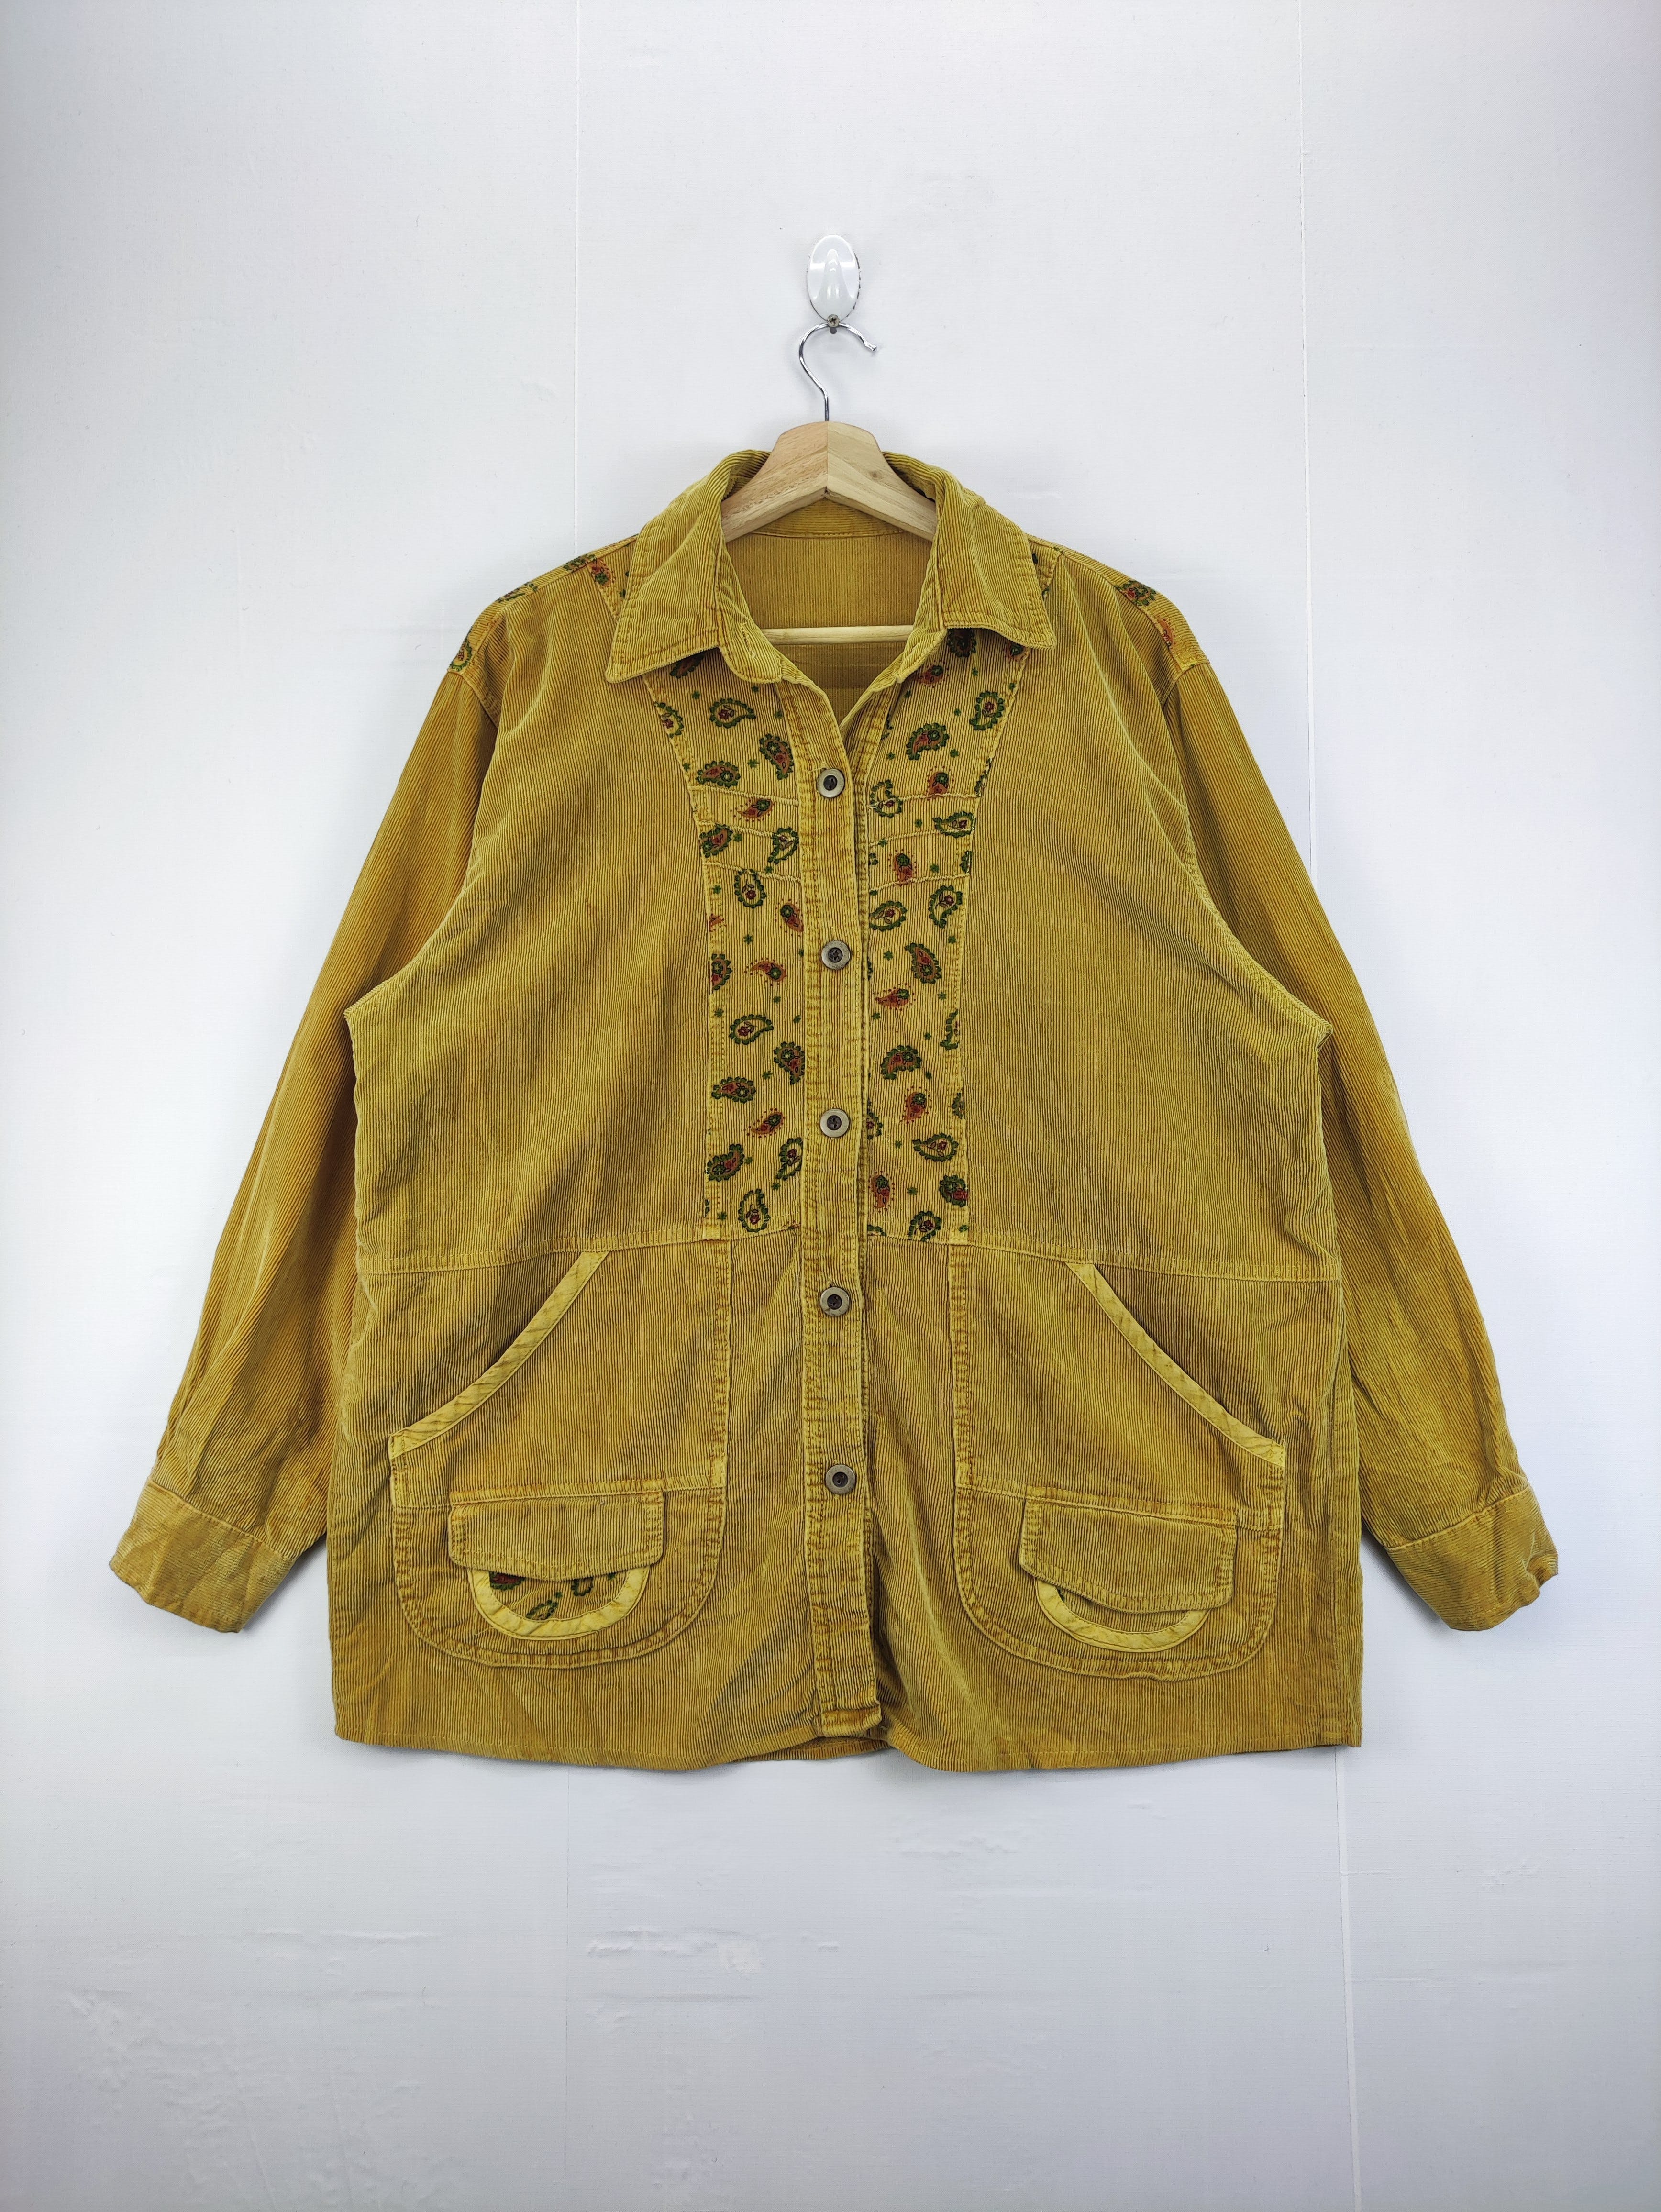 Vintage Corduroy Jacket Button Up By Unbrand - 1